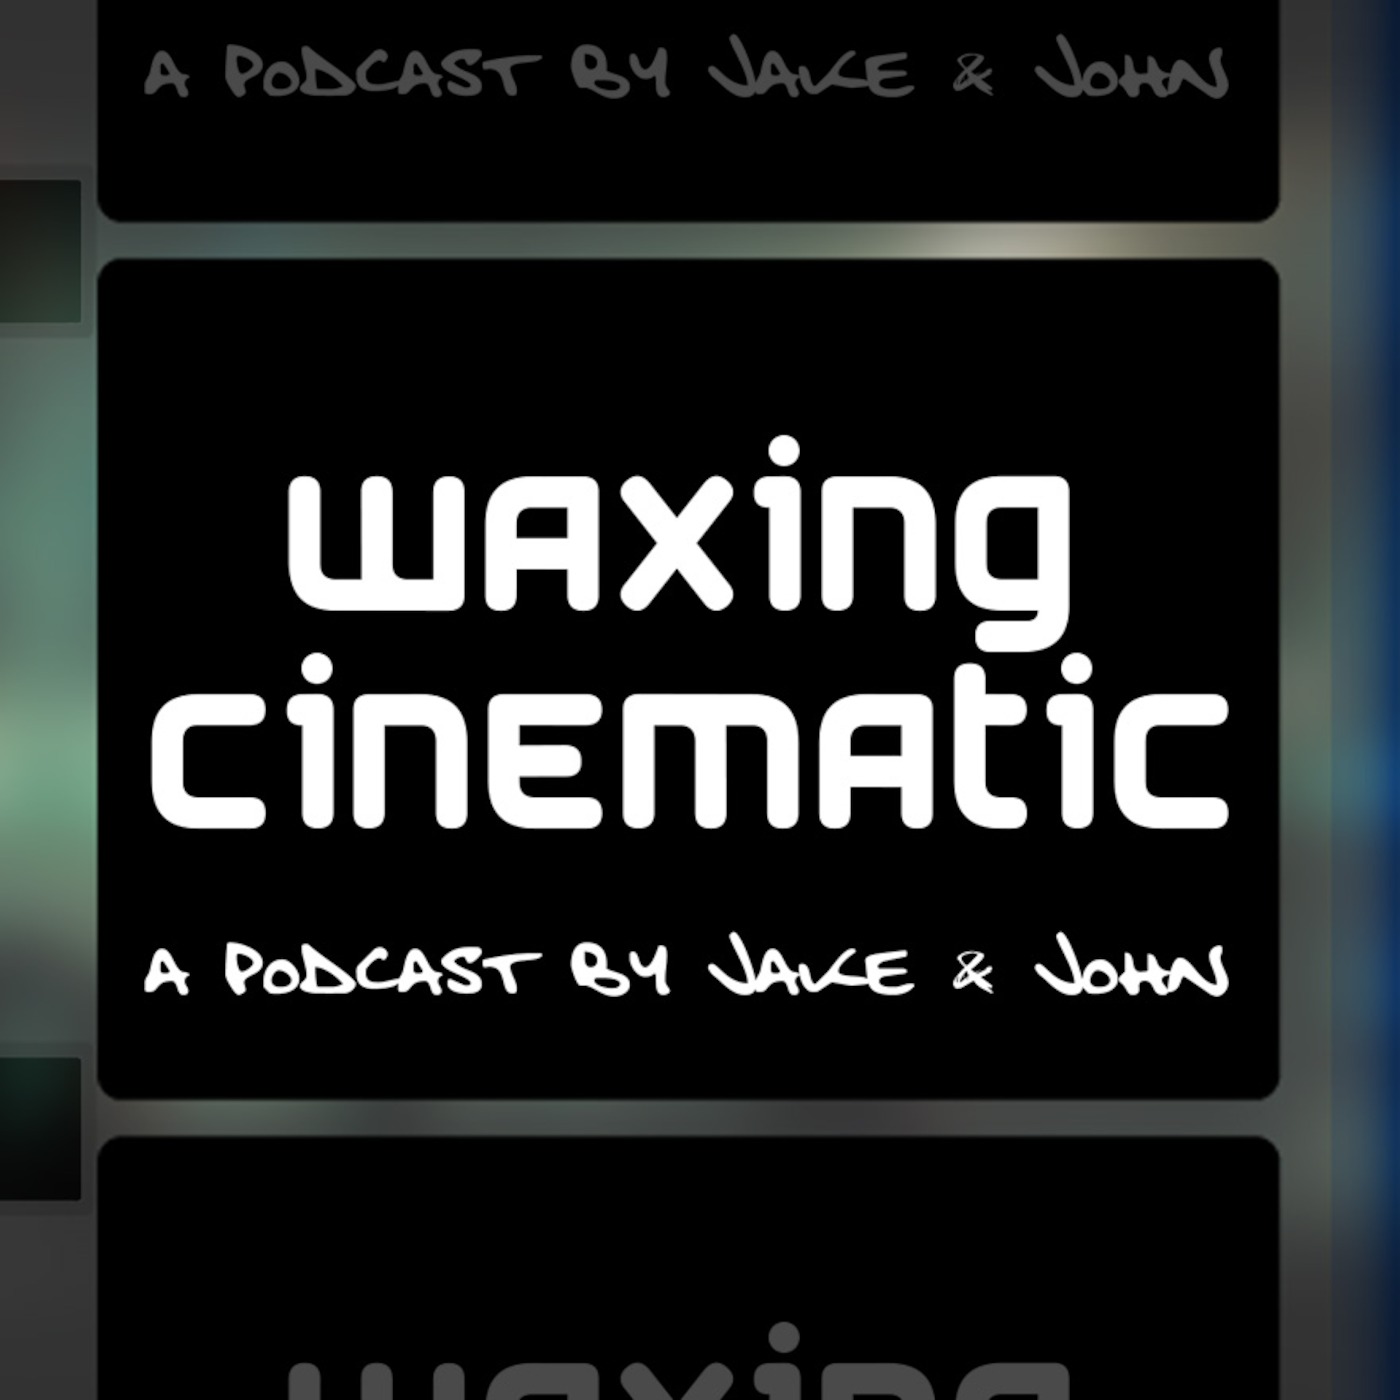 Waxing Cinematic's Podcast